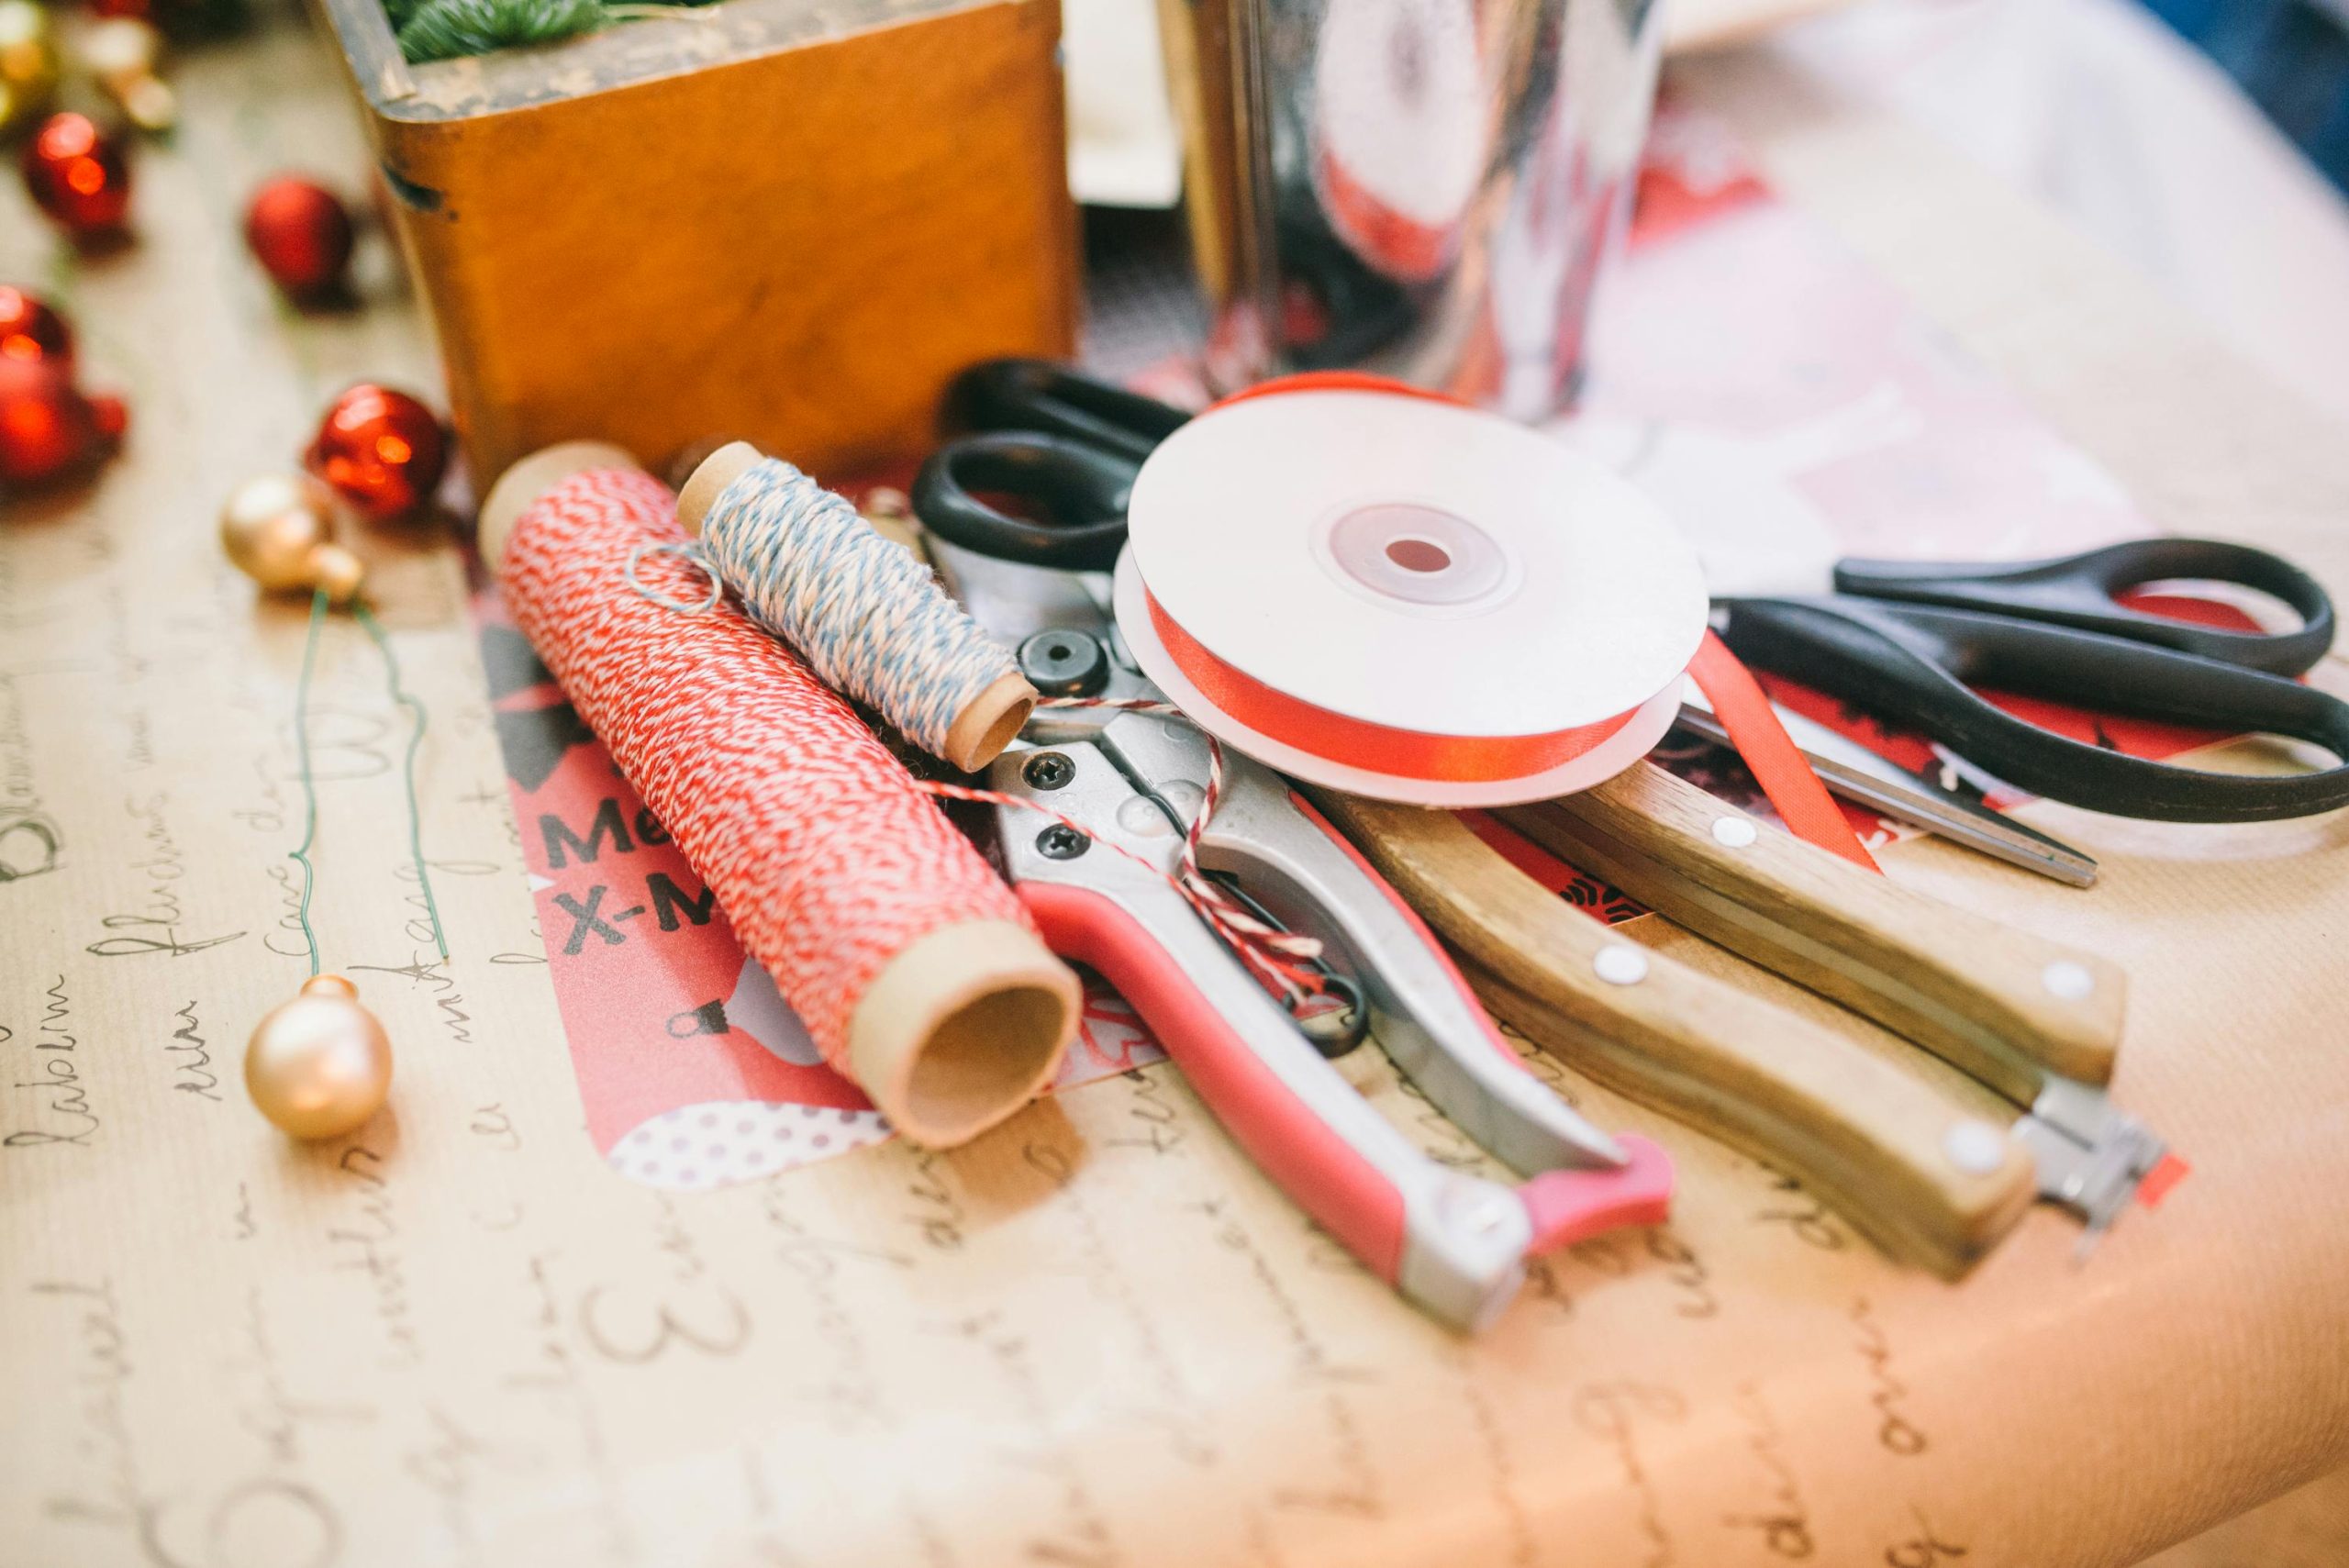 Selecting the Right Organizational Tools